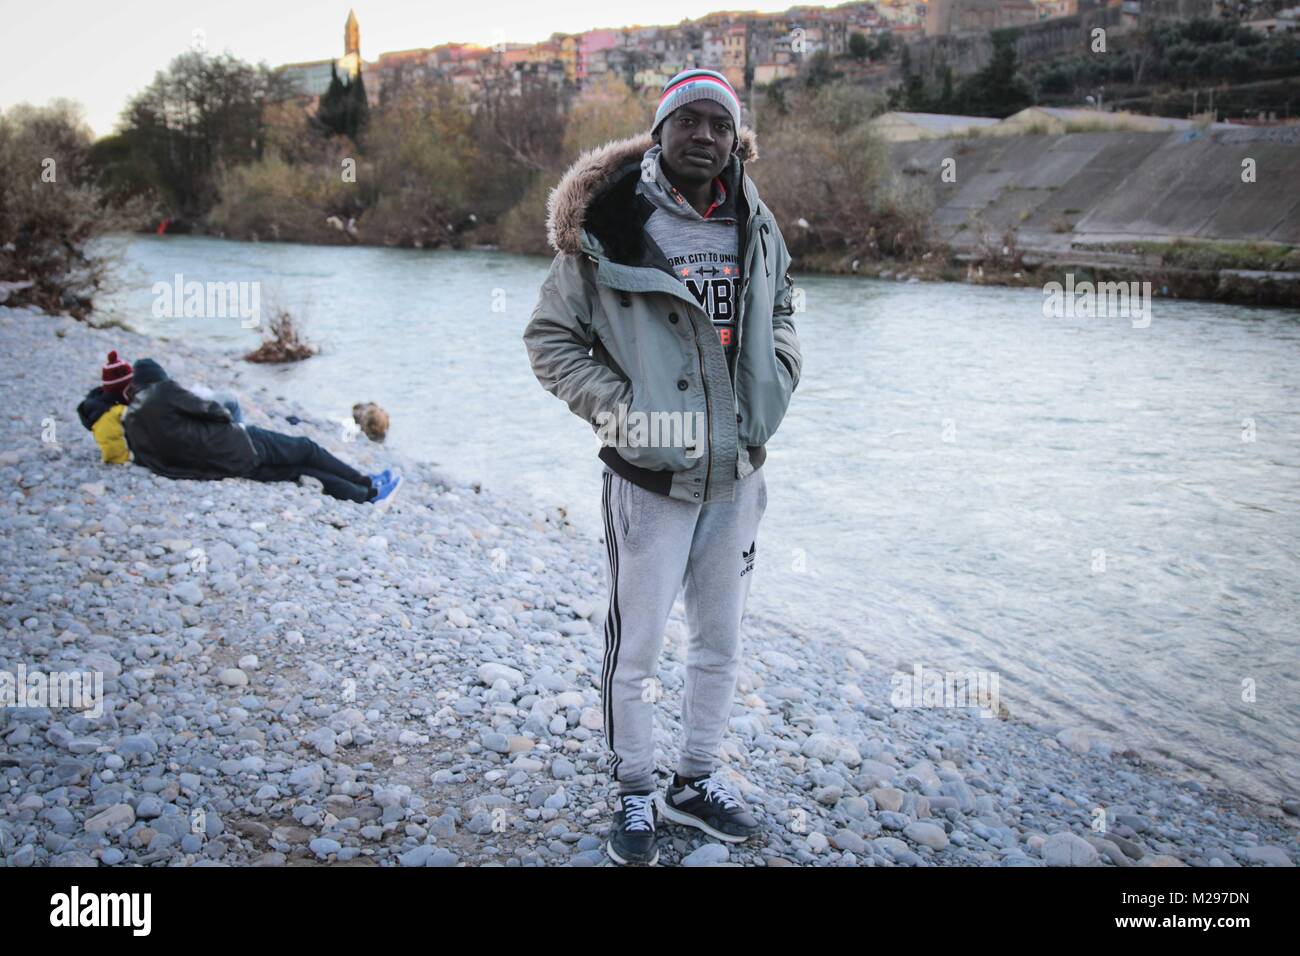 Venitmiglia, Imperia, Italy. 13th Dec, 2017. Salah Baker Alam, from Darfur in Sudan, stands by the river that runs through Ventimiglia. He washes here and sleeps rough beneath a nearby underpass. Hundreds of migrants and refugees are using the Italian town as a base from which to attempt a crossing into nearby France. Most efforts end in failure.Italy is a country hit hard by the European refugee/migrant crisis. Unlike Greece where most of the migrants are from the war torn middle east, most of the migrants in Italy are from African nations heading to Europe for economical reasons. (Cred Stock Photo